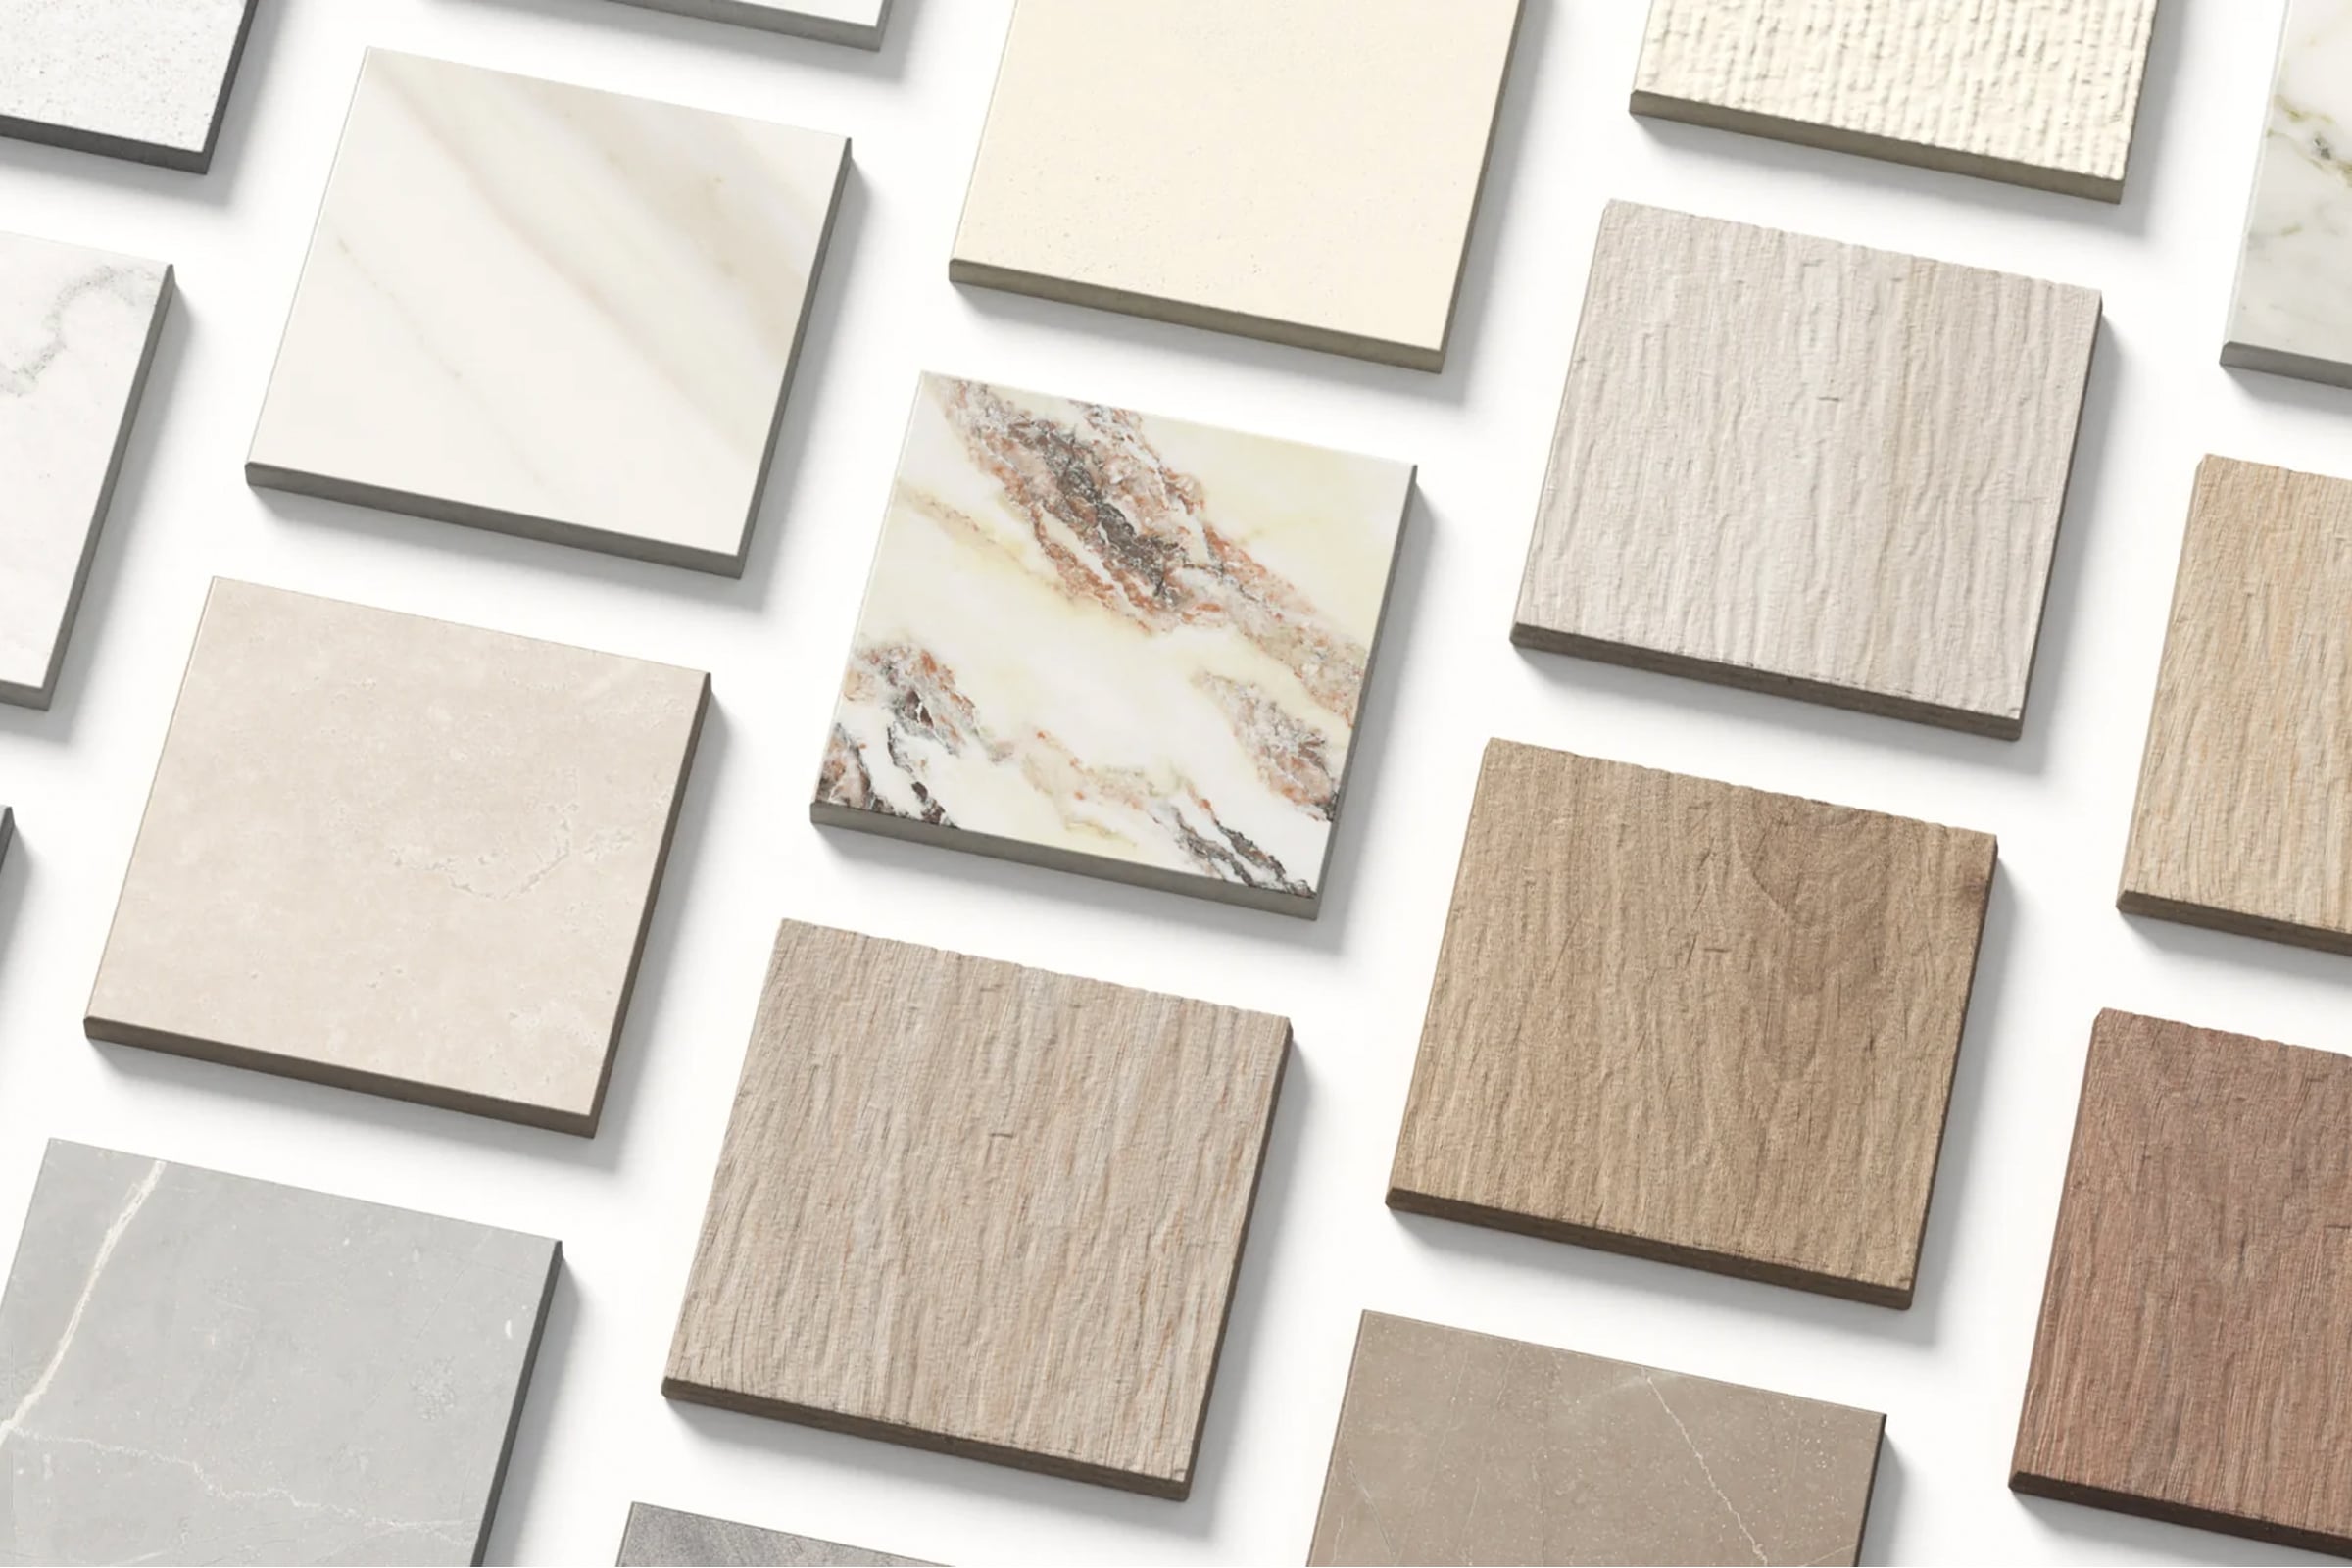 A Guide to Testing Tile Samples in Your Home